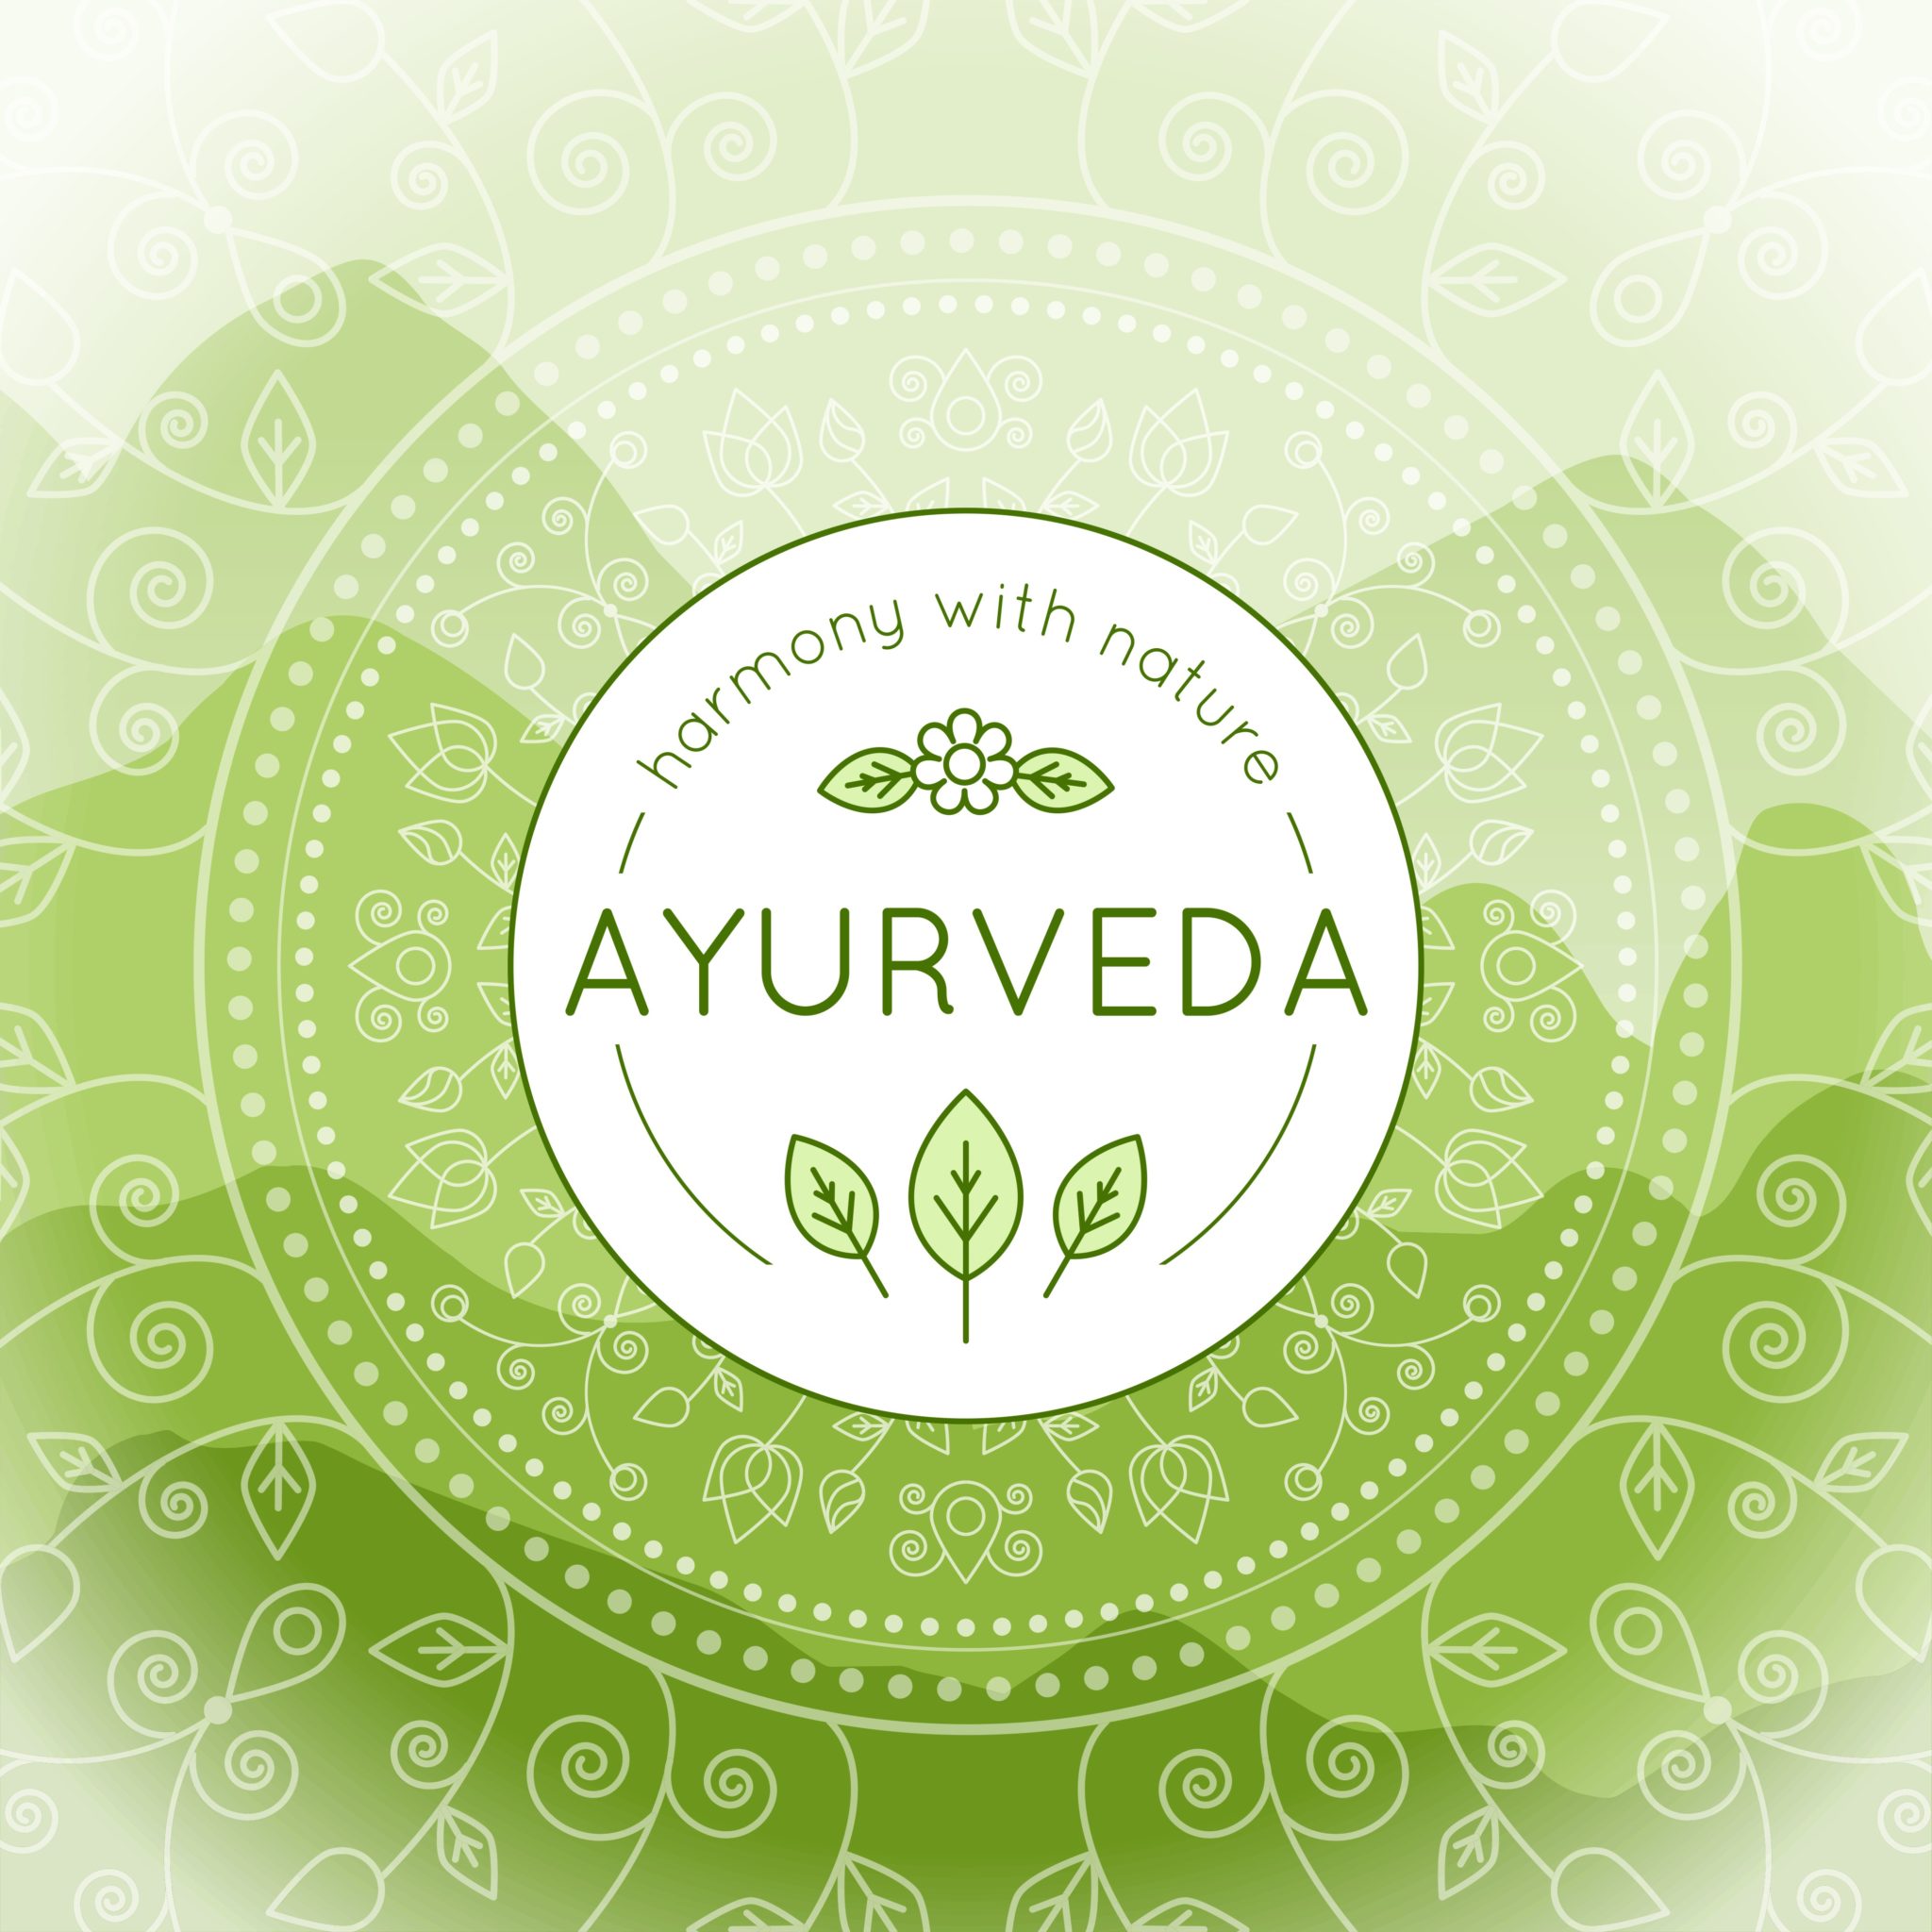 ayurveda-a-brief-introduction-balancing-change-mindfully